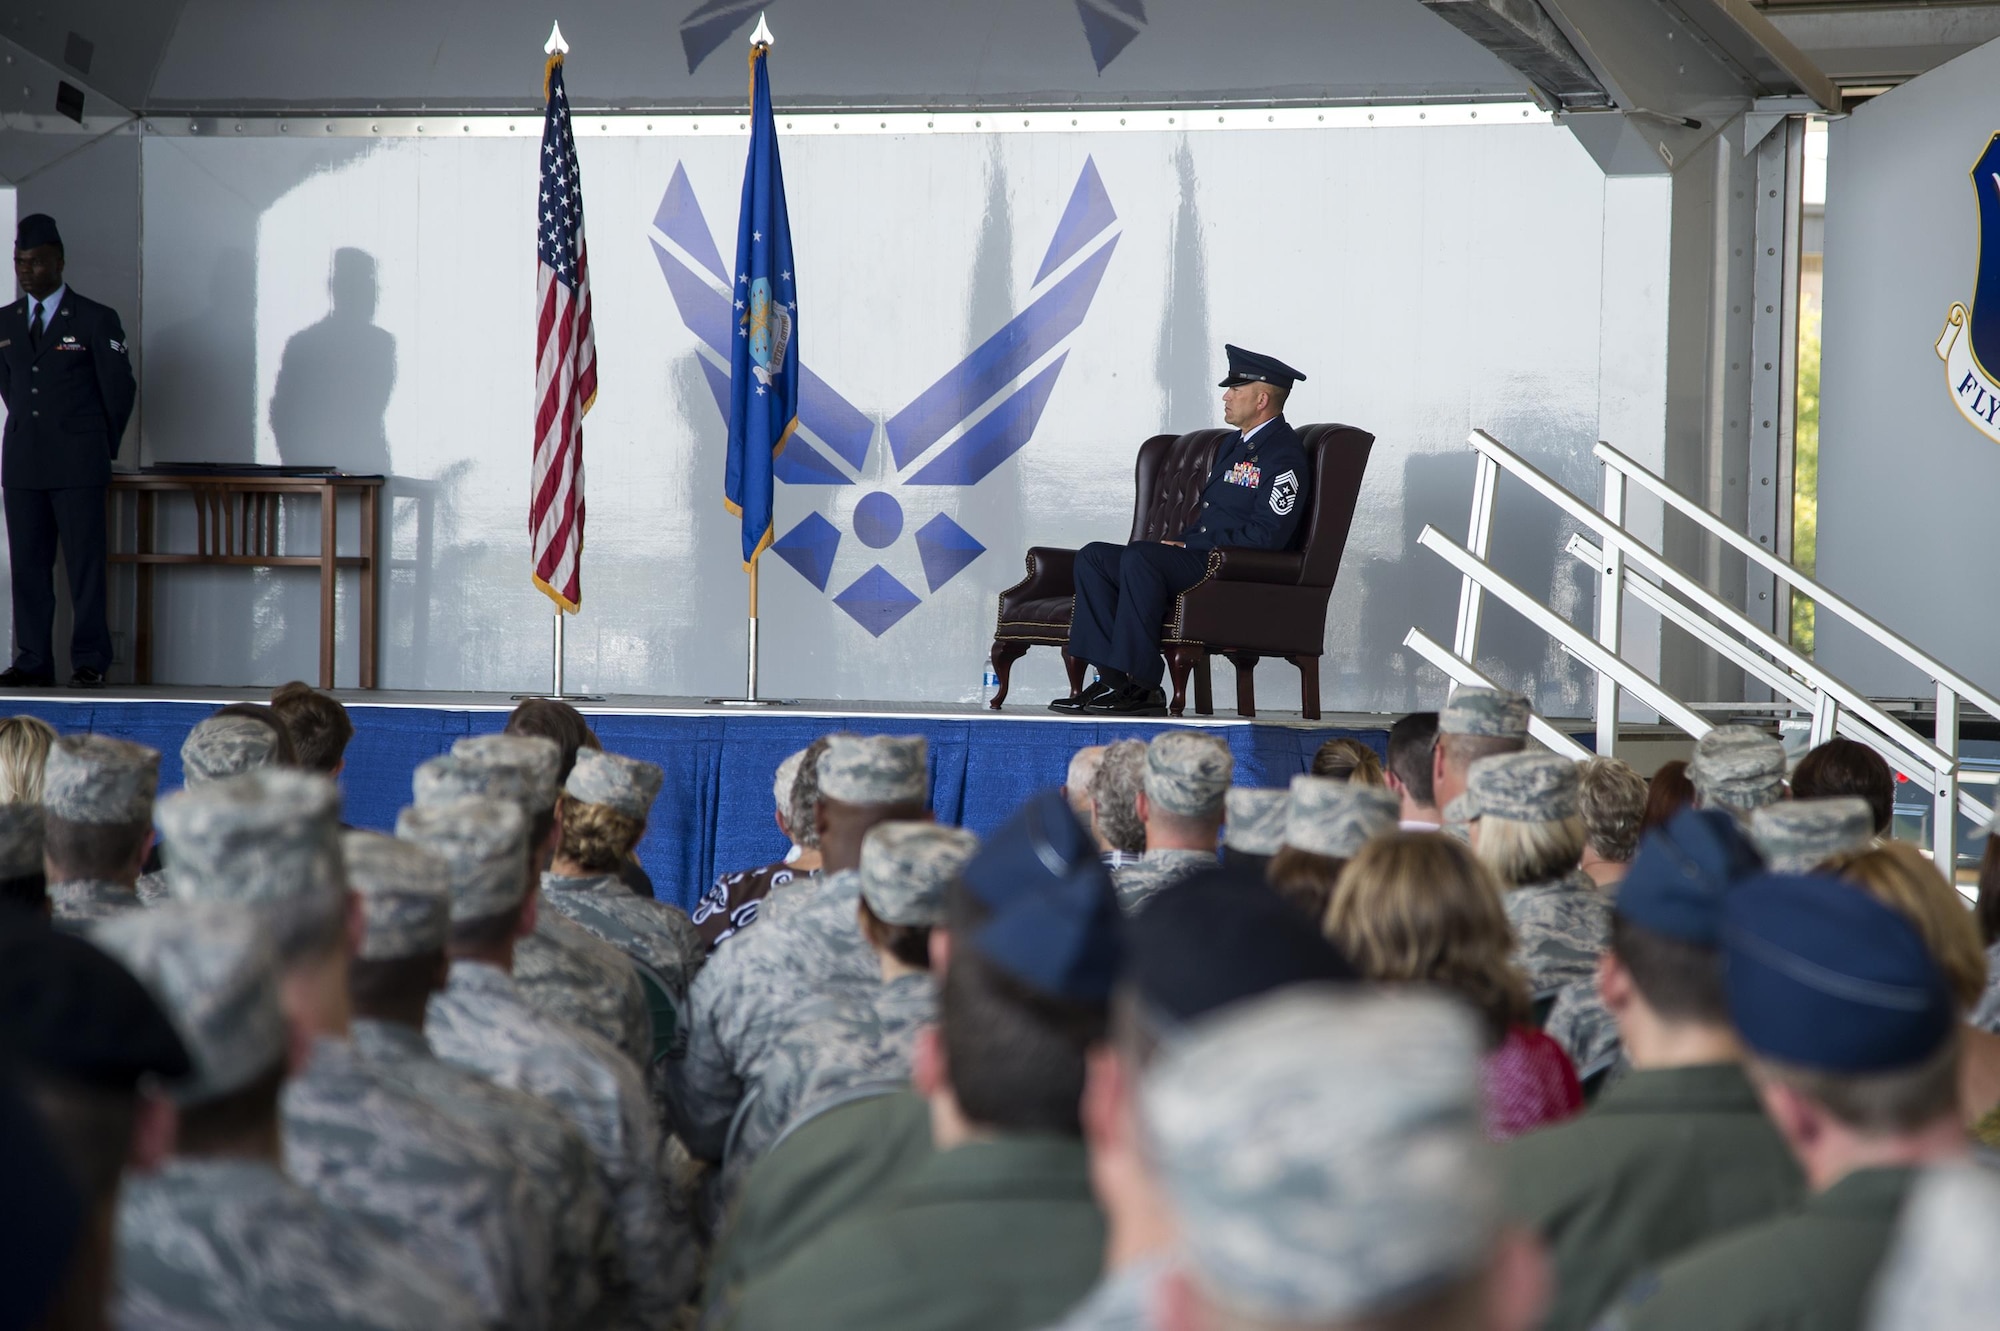 U.S. Air Force Chief Master Sgt. David Kelch, 23d Wing command chief, listens as Brig. Gen. Chad Franks, senior executive officer to the Air Force vice chief of staff, gives his remarks during a retirement ceremony at Moody Air Force Base, Ga., May 26, 2016. Franks thanked Kelch for all his hard work and dedication during their time working together at the 23d WG.. (U.S. Air Force photo by Airman 1st Class Janiqua P. Robinson/Released)